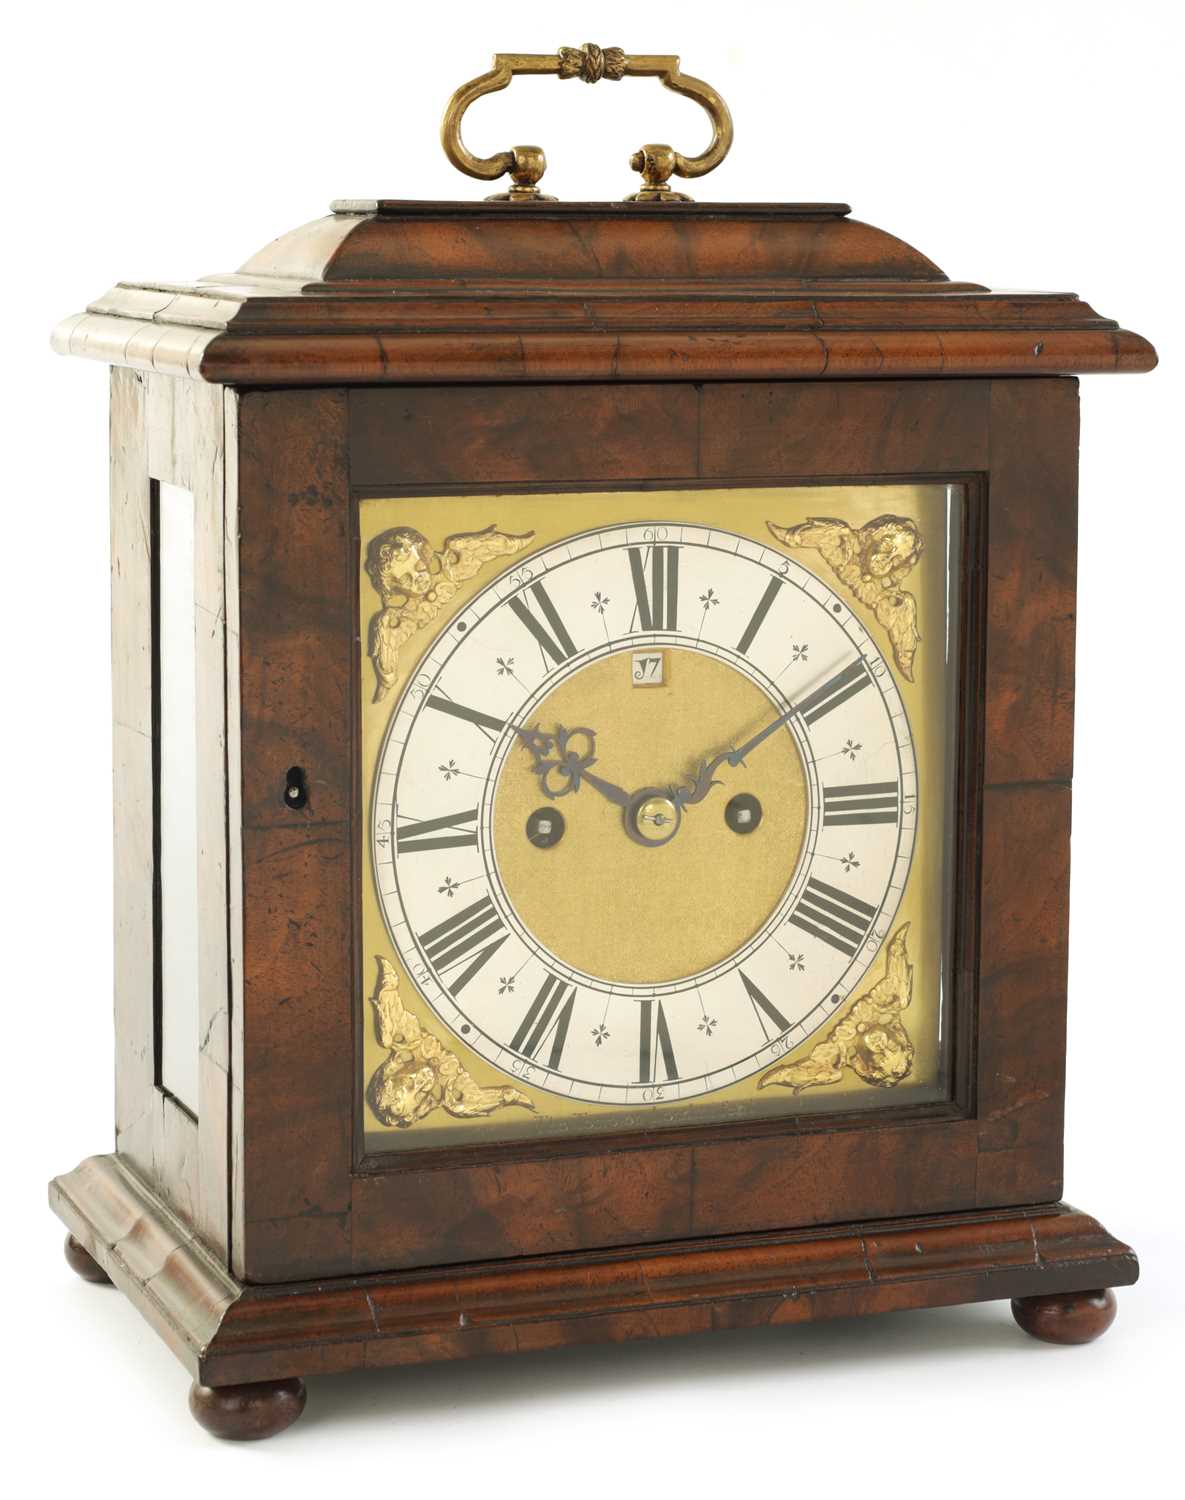 THOMAS TOMPION, LONDINI. AN IMPORTANT AND RARE PRE NUMBERED CHARLES II FIGURED WALNUT DUTCH STRIKING - Image 3 of 38